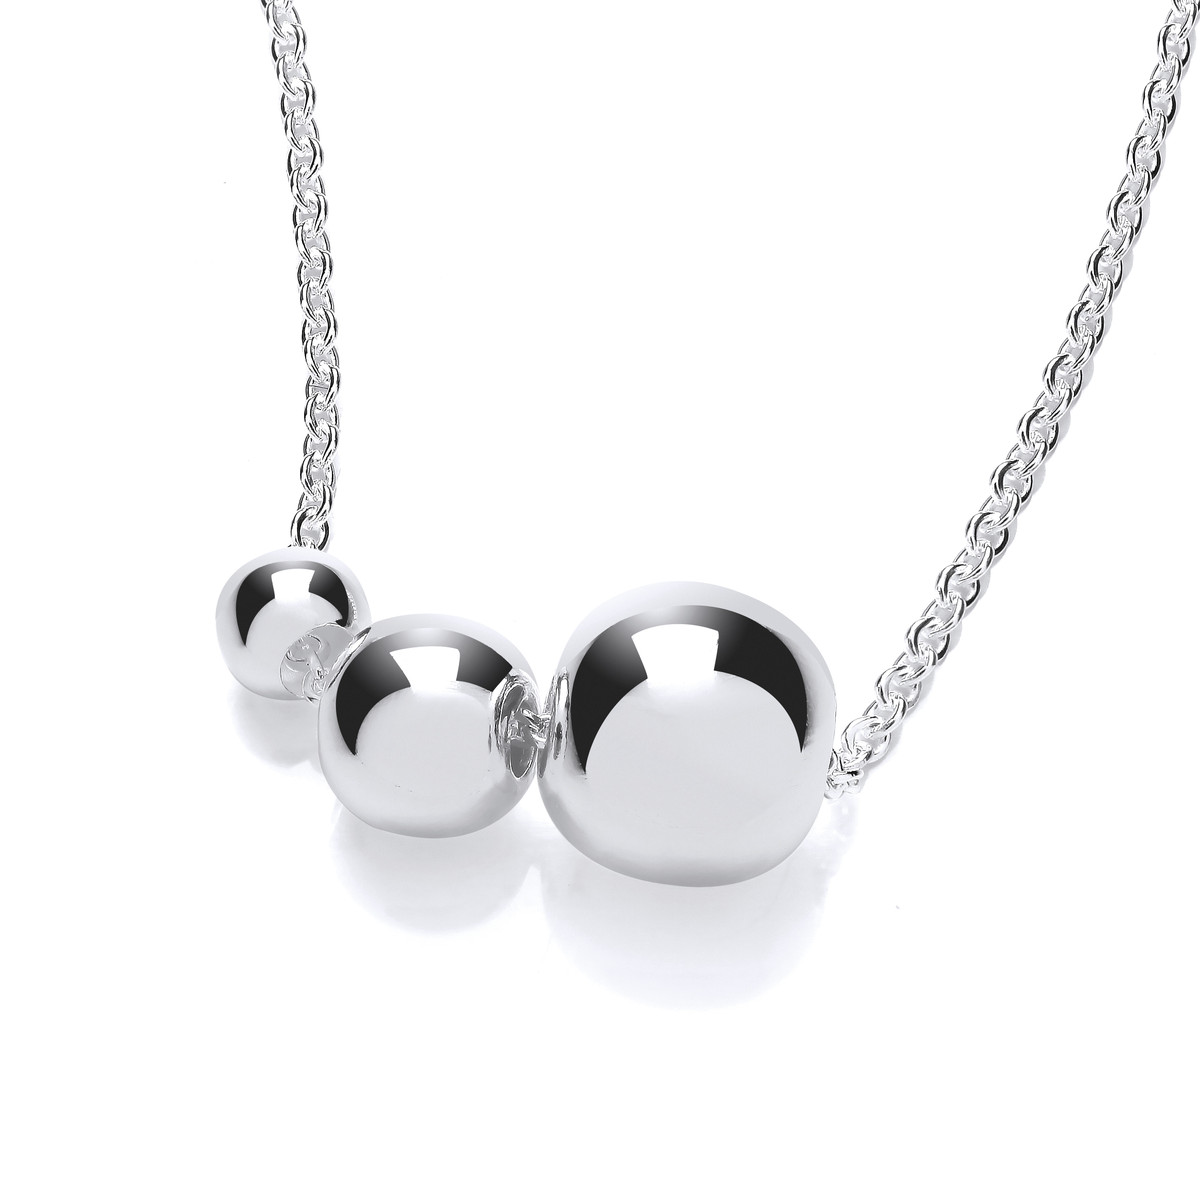 1.5mm Italian 925 Sterling Silver Ball Chain Necklace 24